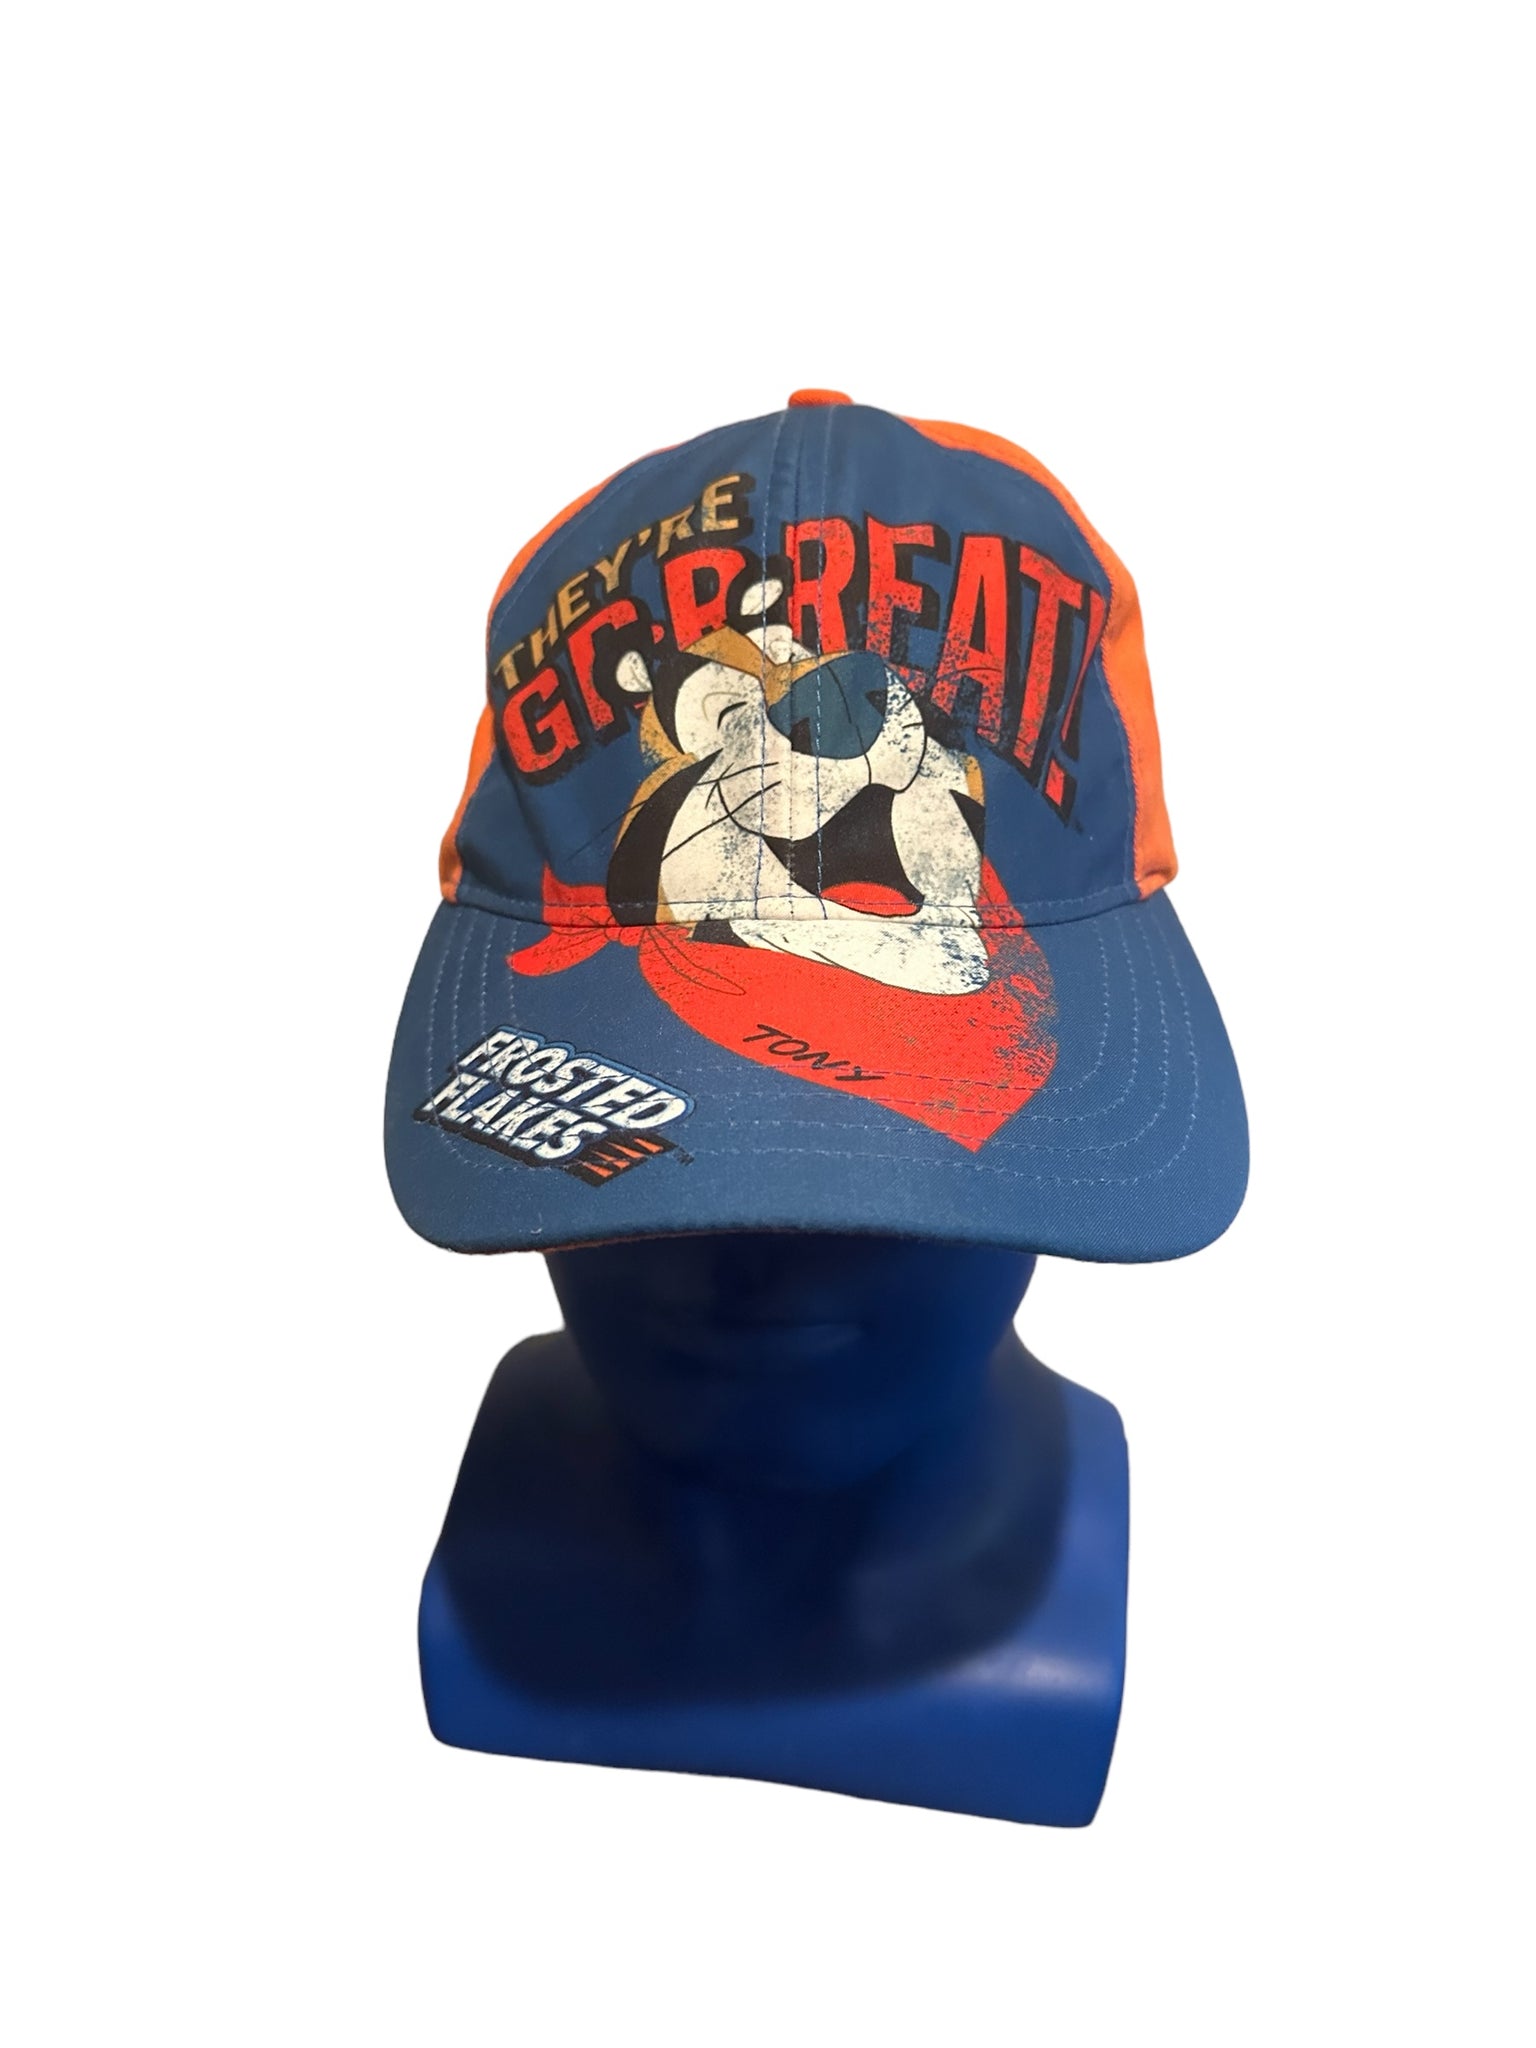 Ball cap Frosted Flakes Tony Tiger Kelloggs All size Blue Orange They're Grrreat